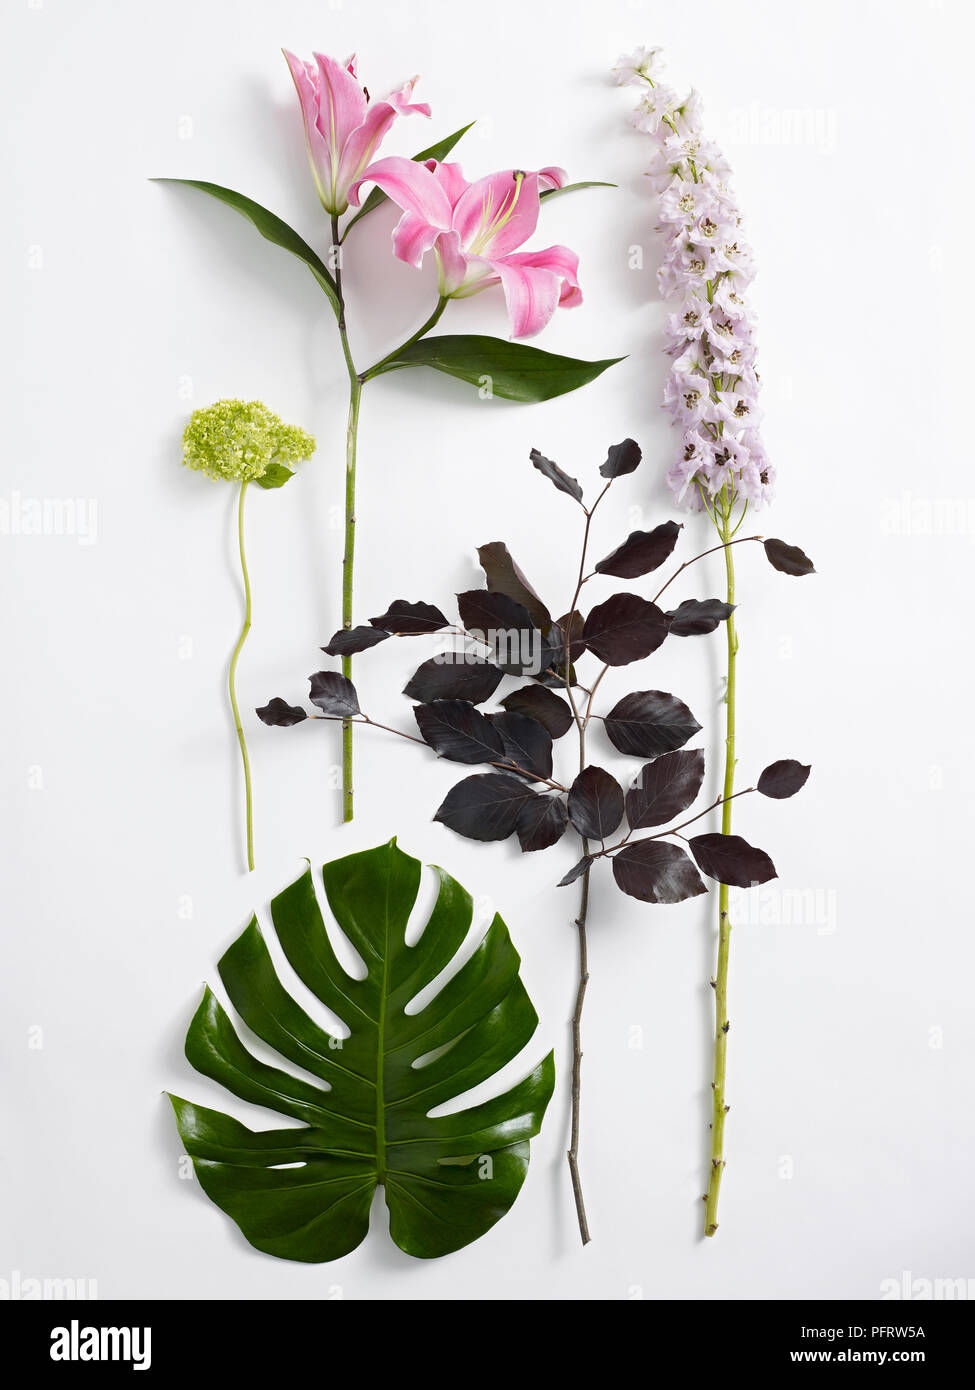 Flowers for flower arranging, pink lilies, hydrangea, delphinium, copper beech leaves and monstera leaf Stock Photo